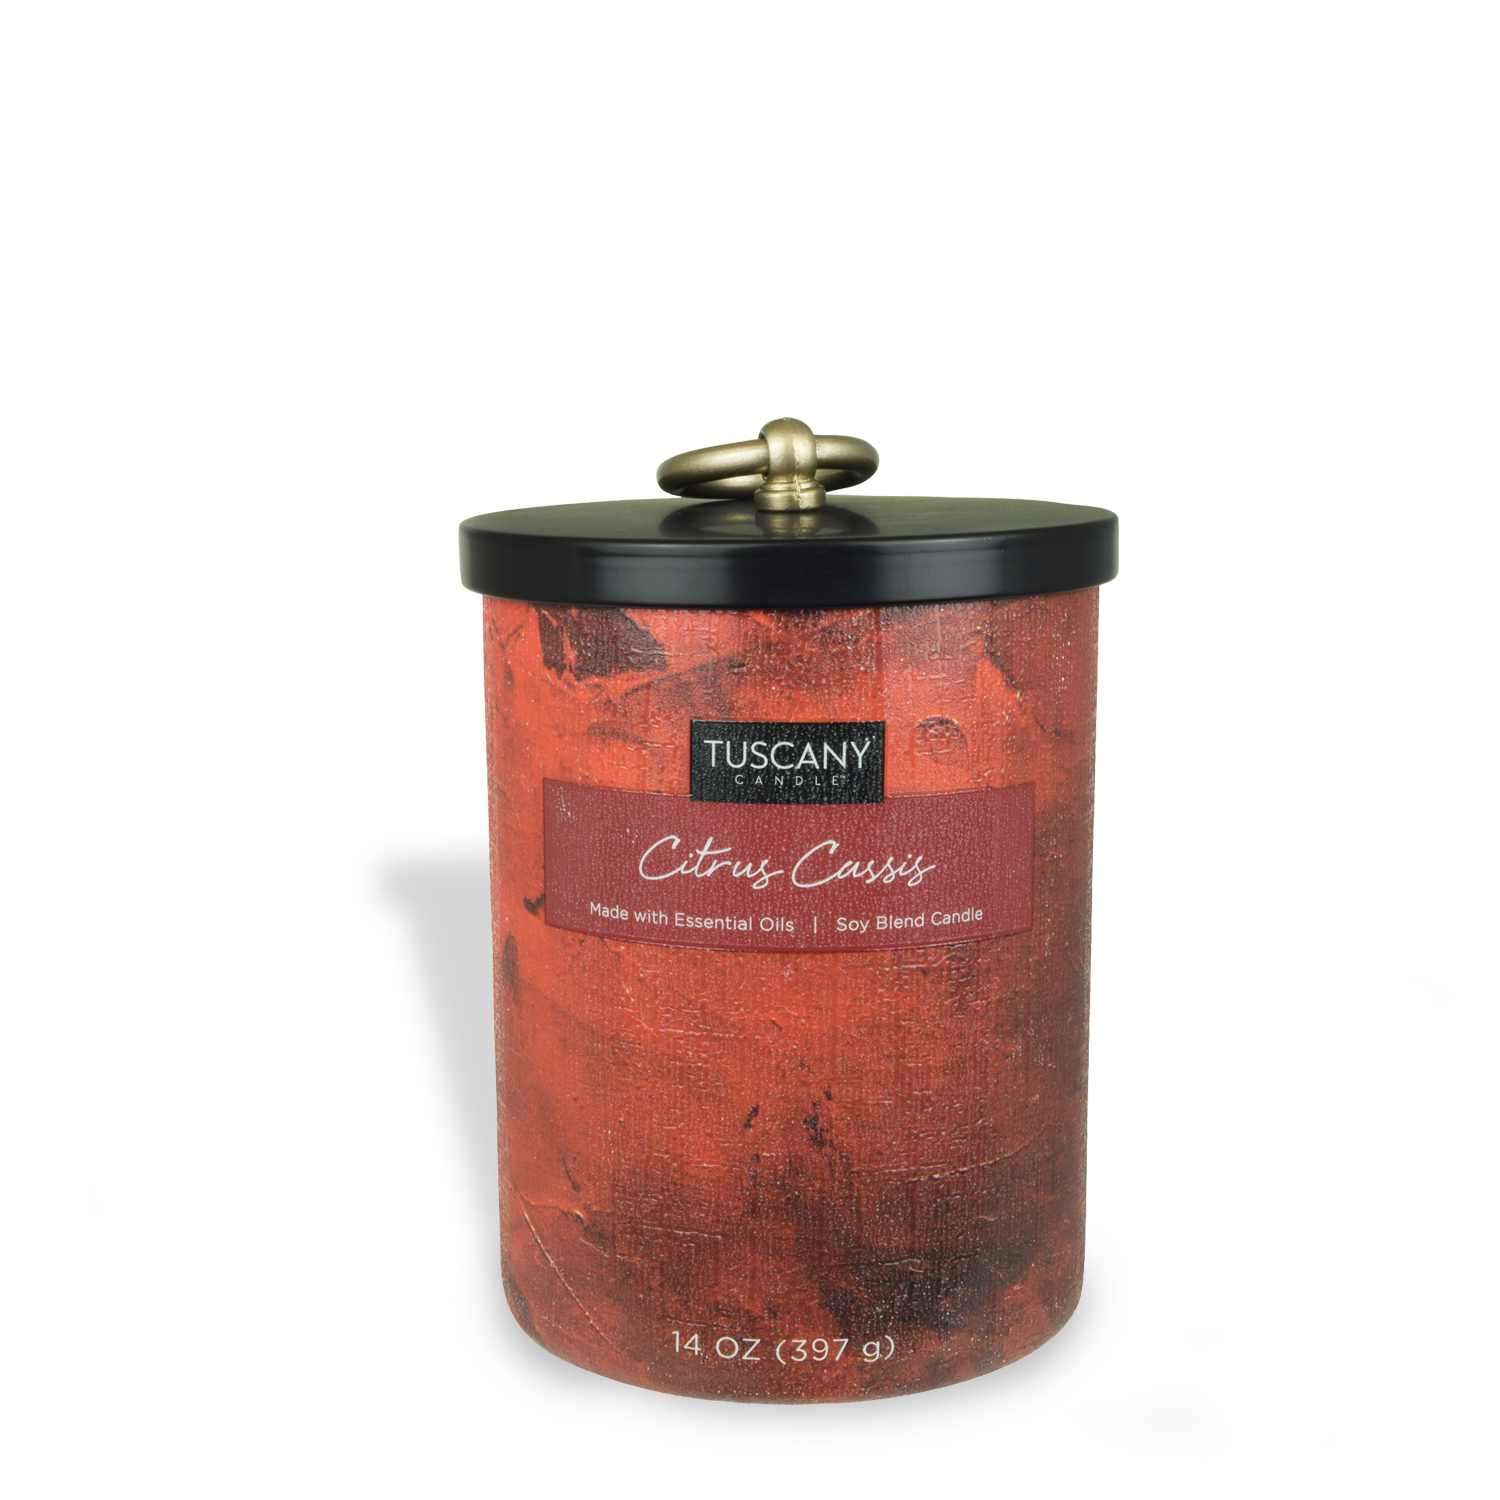 A Citrus Cassis Scented Jar Candle (14 oz) from the Tuscany Candle Home Décor Collection, with a black lid, emitting a delightful fragrance of essential oils, set against a clean white background.